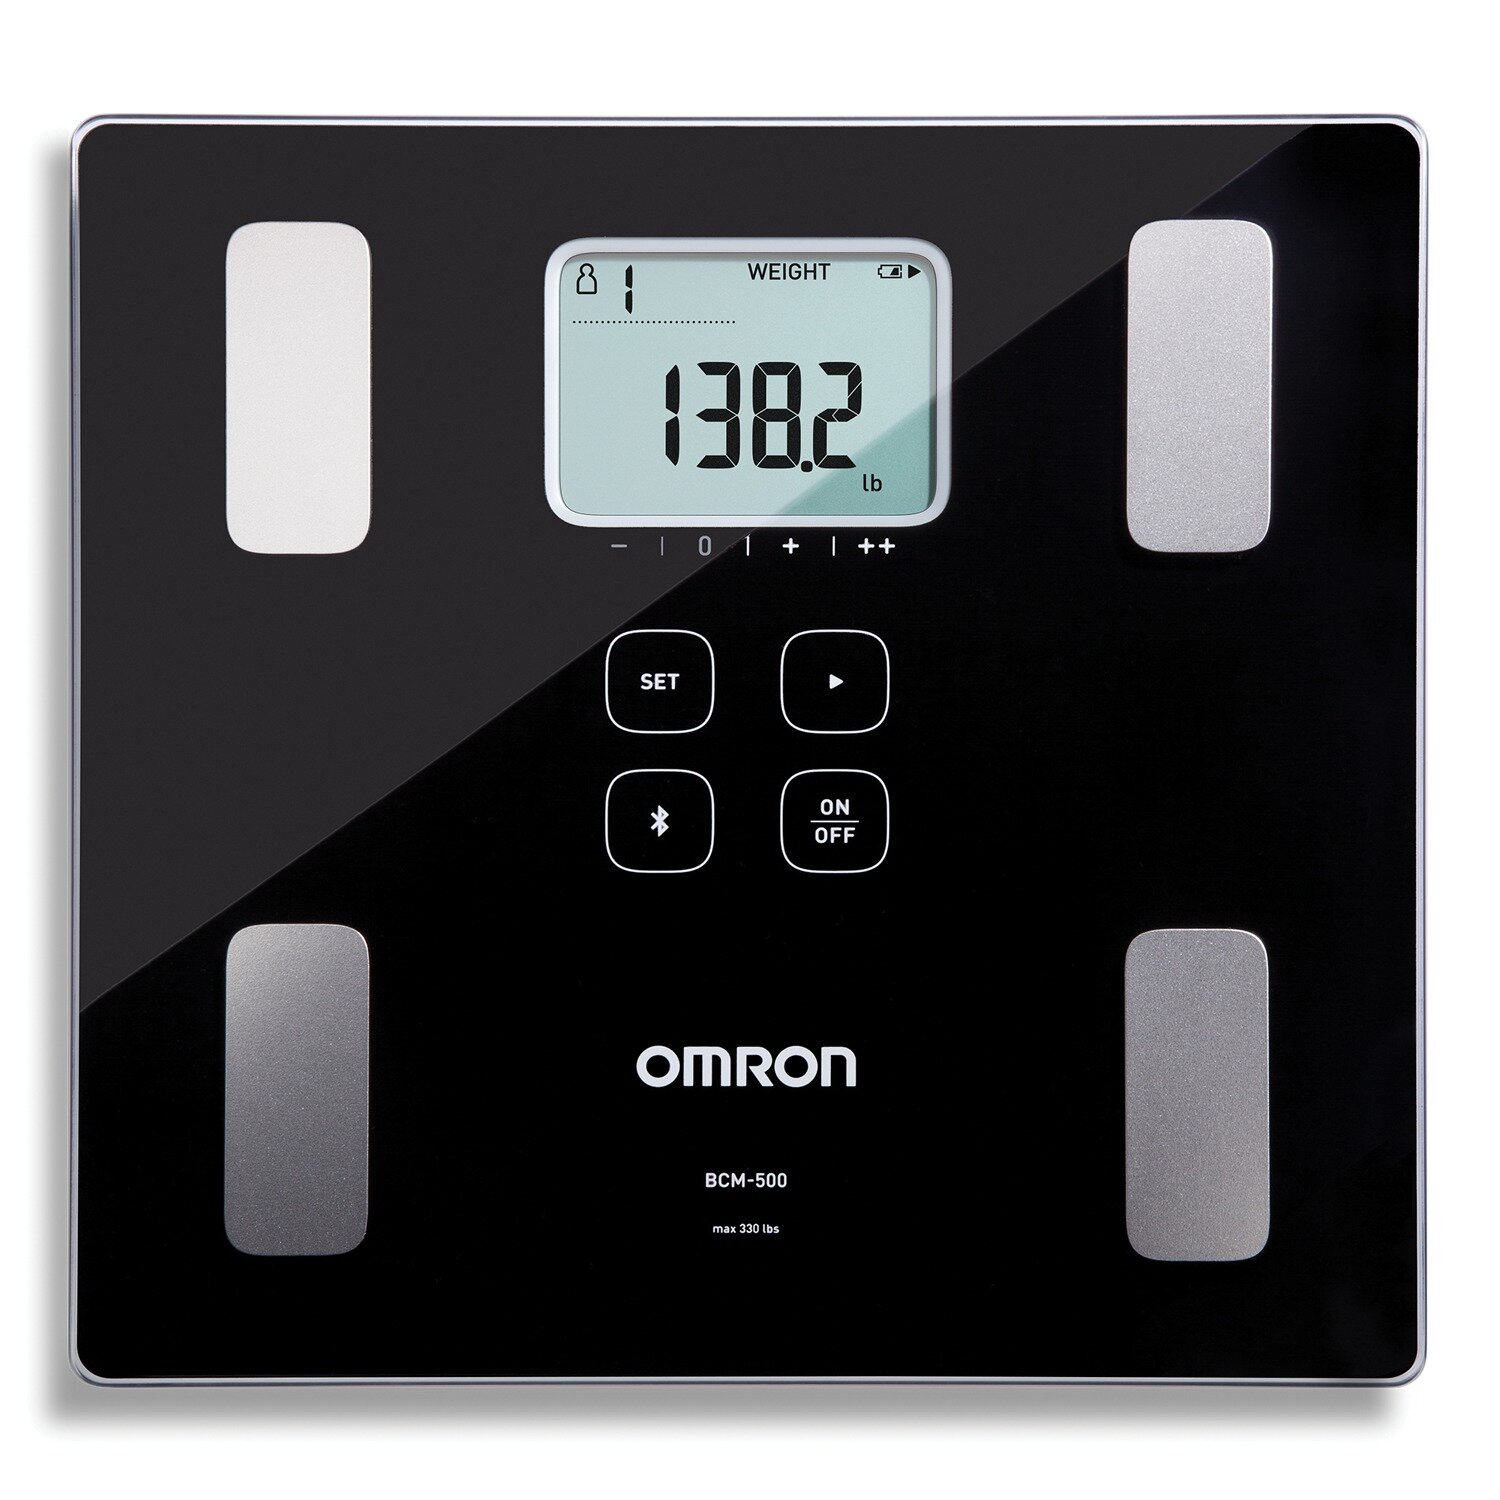 Difference Function Omron Digital Personal Weighing Bathroom LCD Glass Scales 